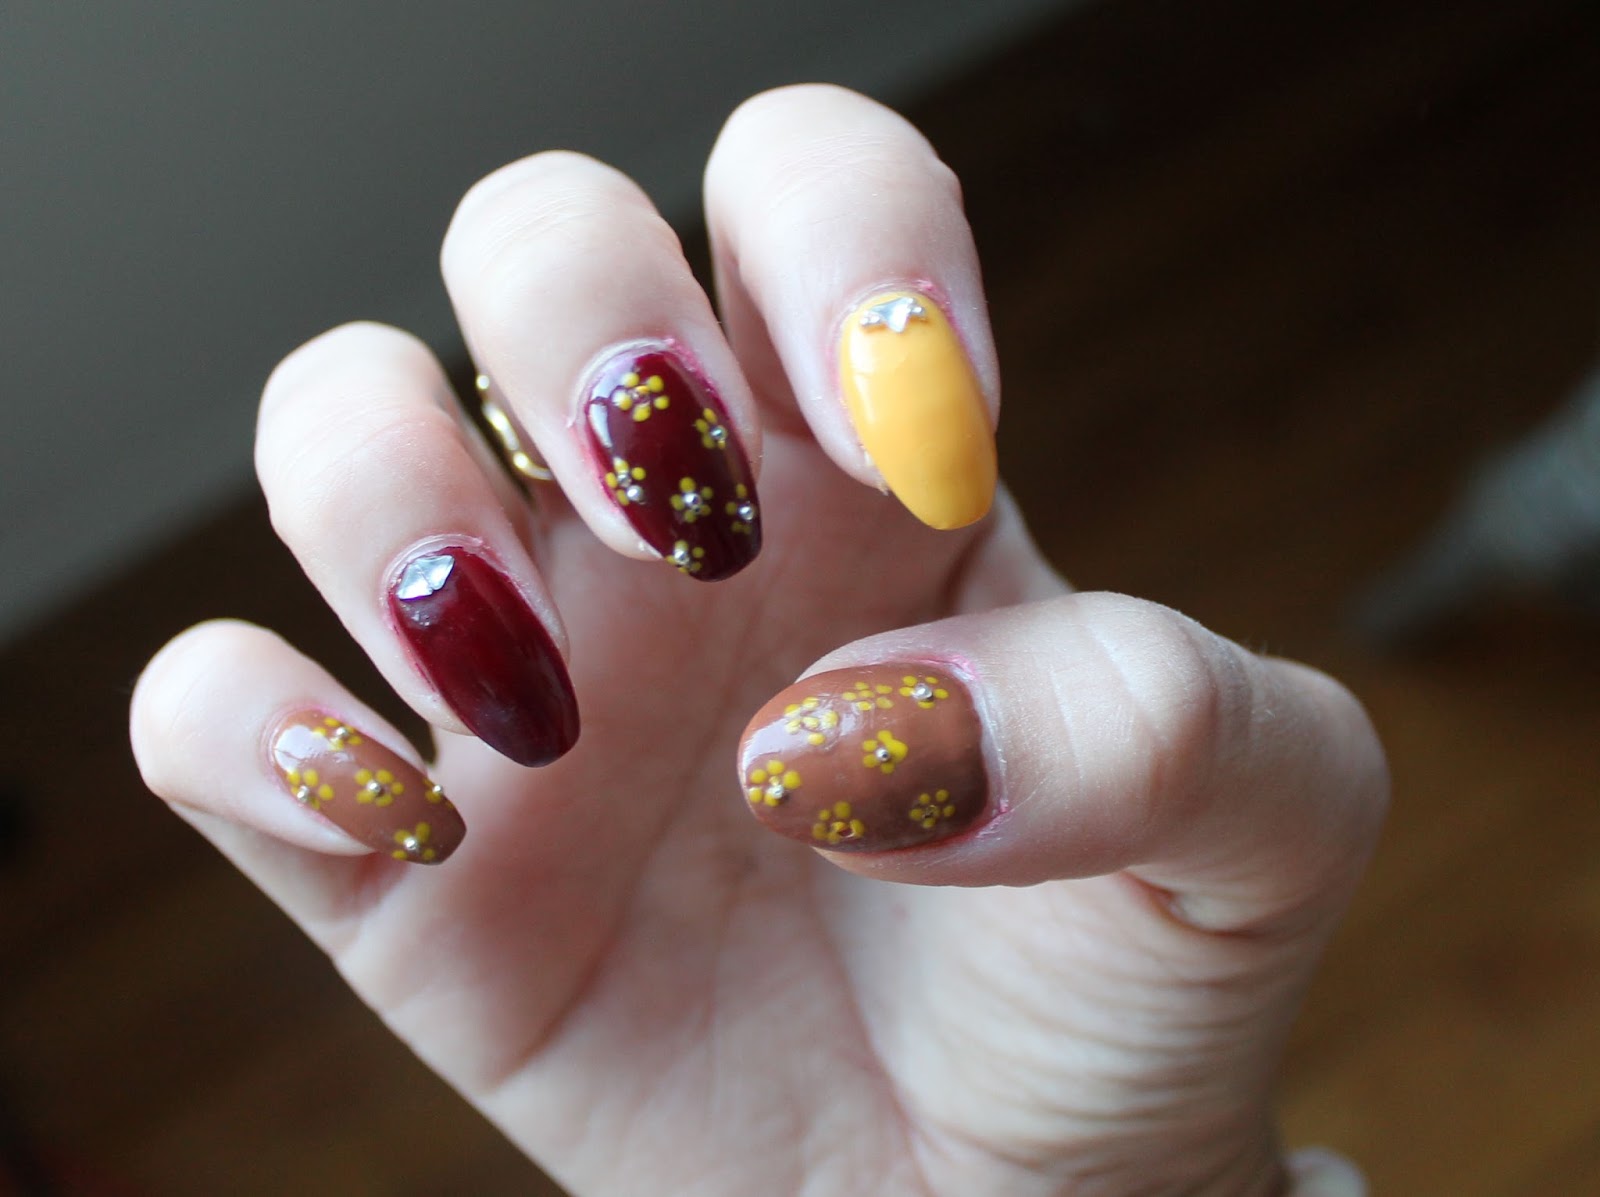 1. "Crazy Fall Nail Designs: 10 Ideas to Try This Season" - wide 4